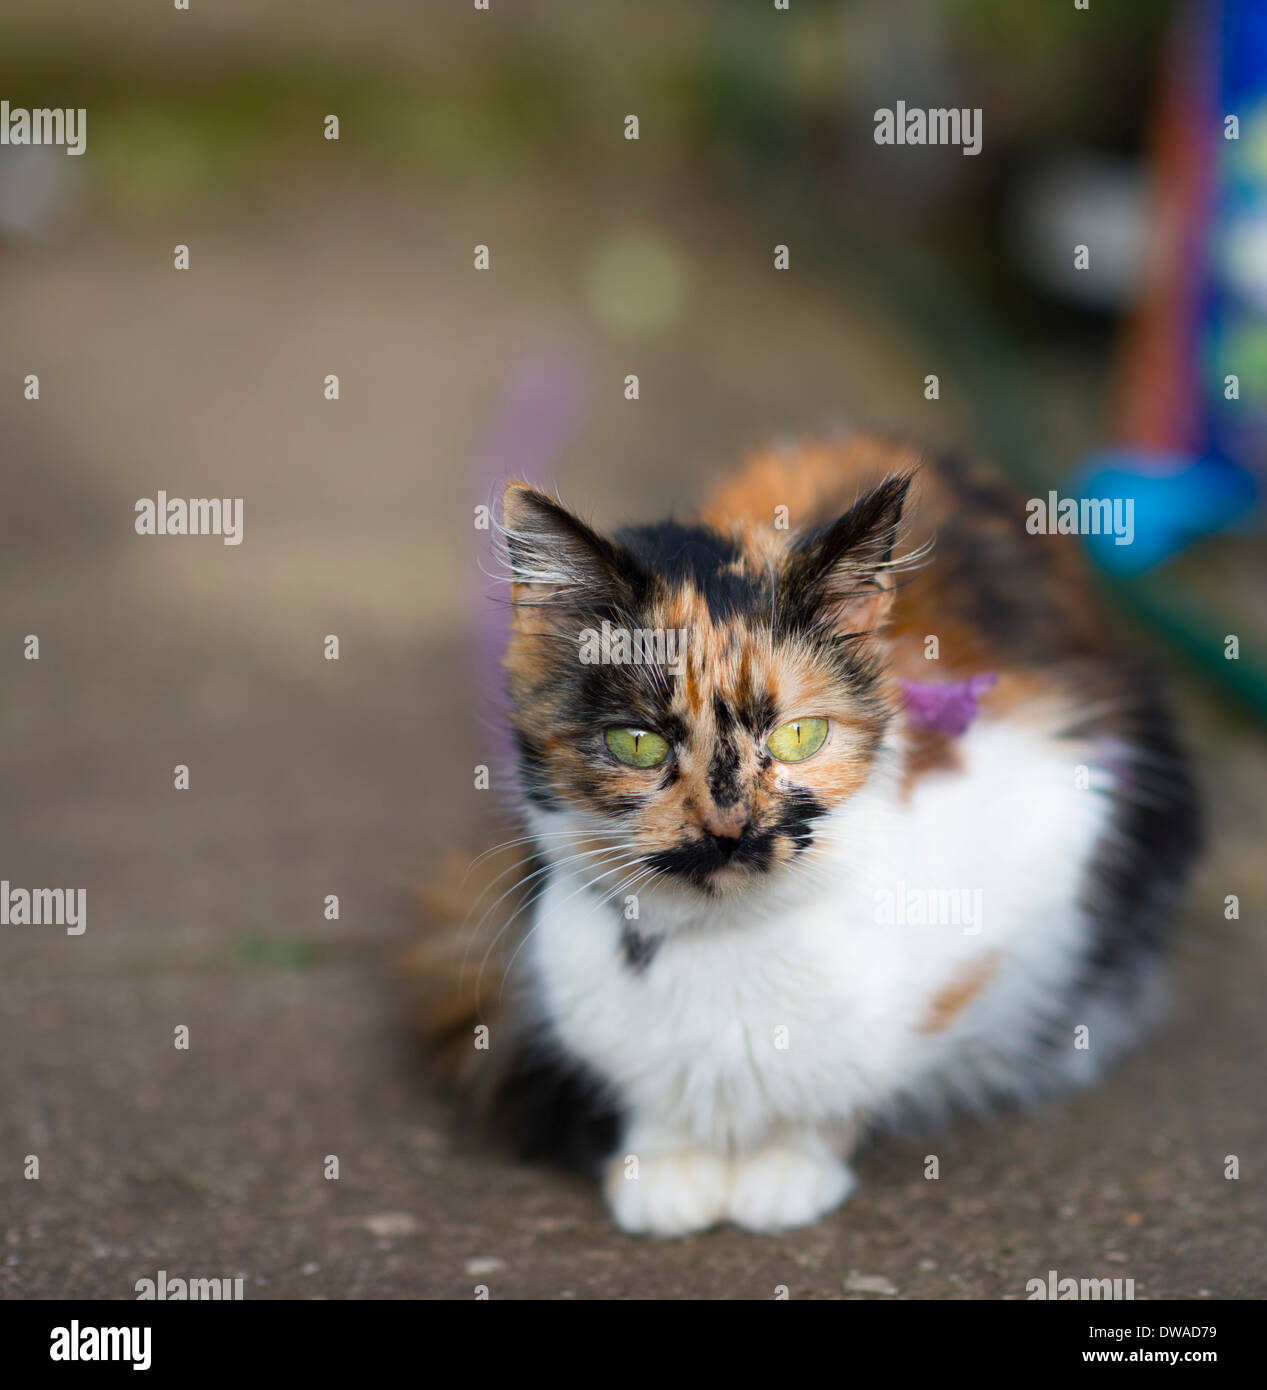 Small cat photographed at f2 showing Bokah on Nikkor 85mm 1.4 lens relaxing on harness Stock Photo